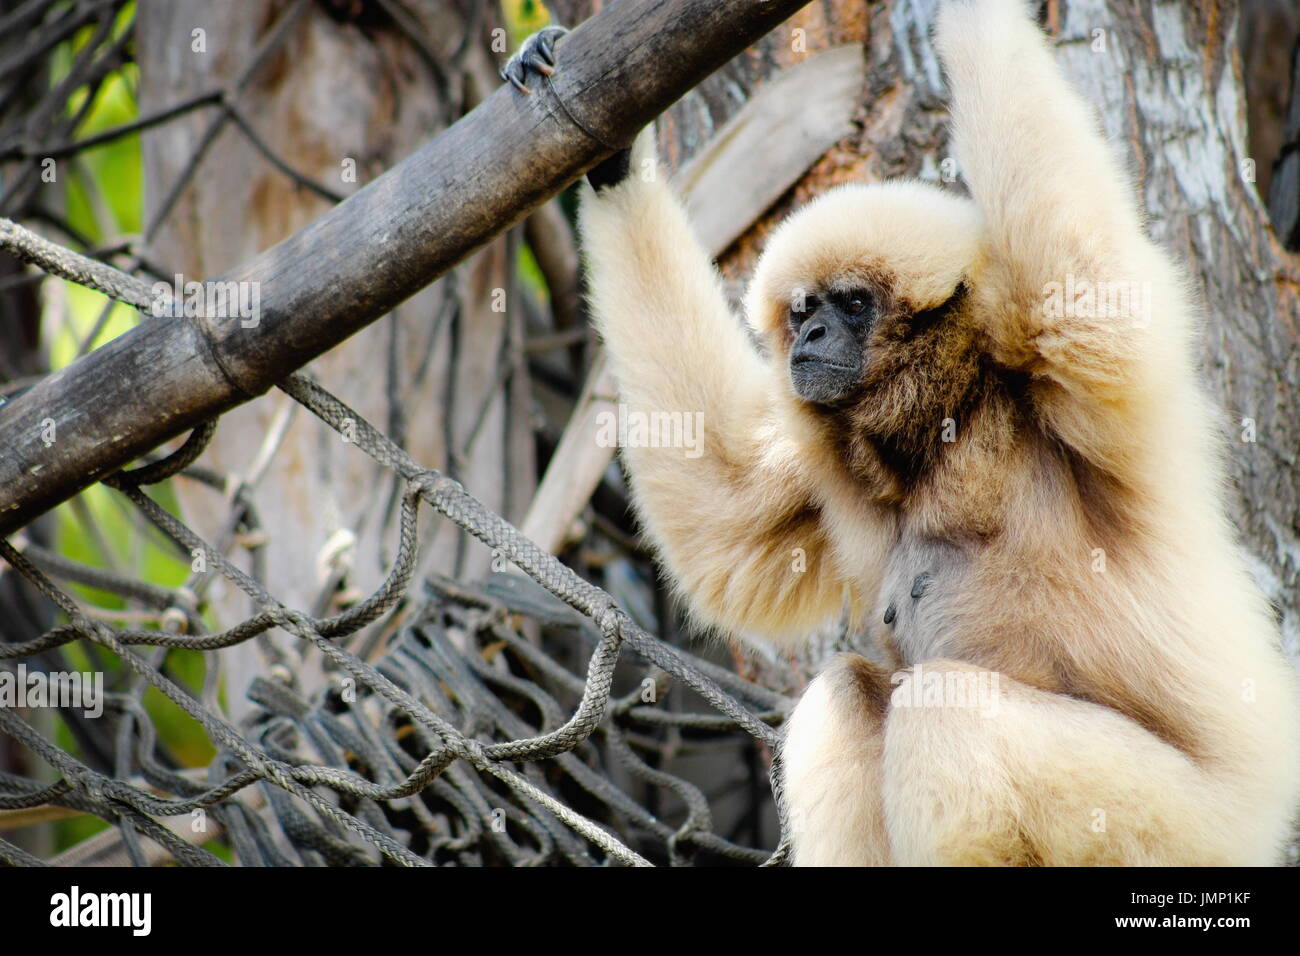 The lar gibbon (Hylobates lar), also known as the white-handed gibbon, is an endangered primate in the gibbon family Stock Photo